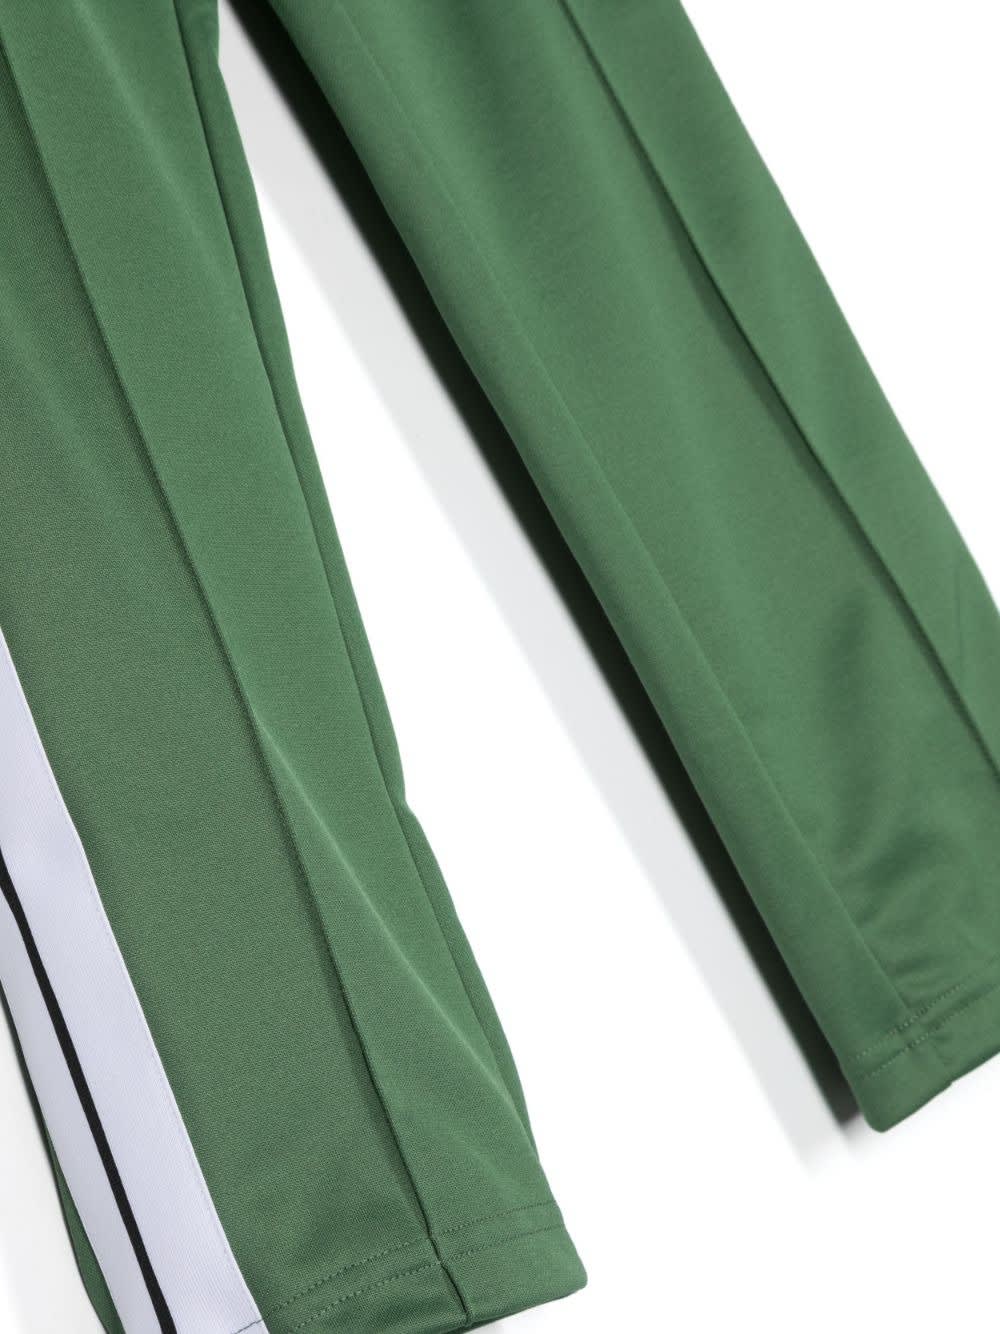 Shop Palm Angels Green Track Trousers With Logo